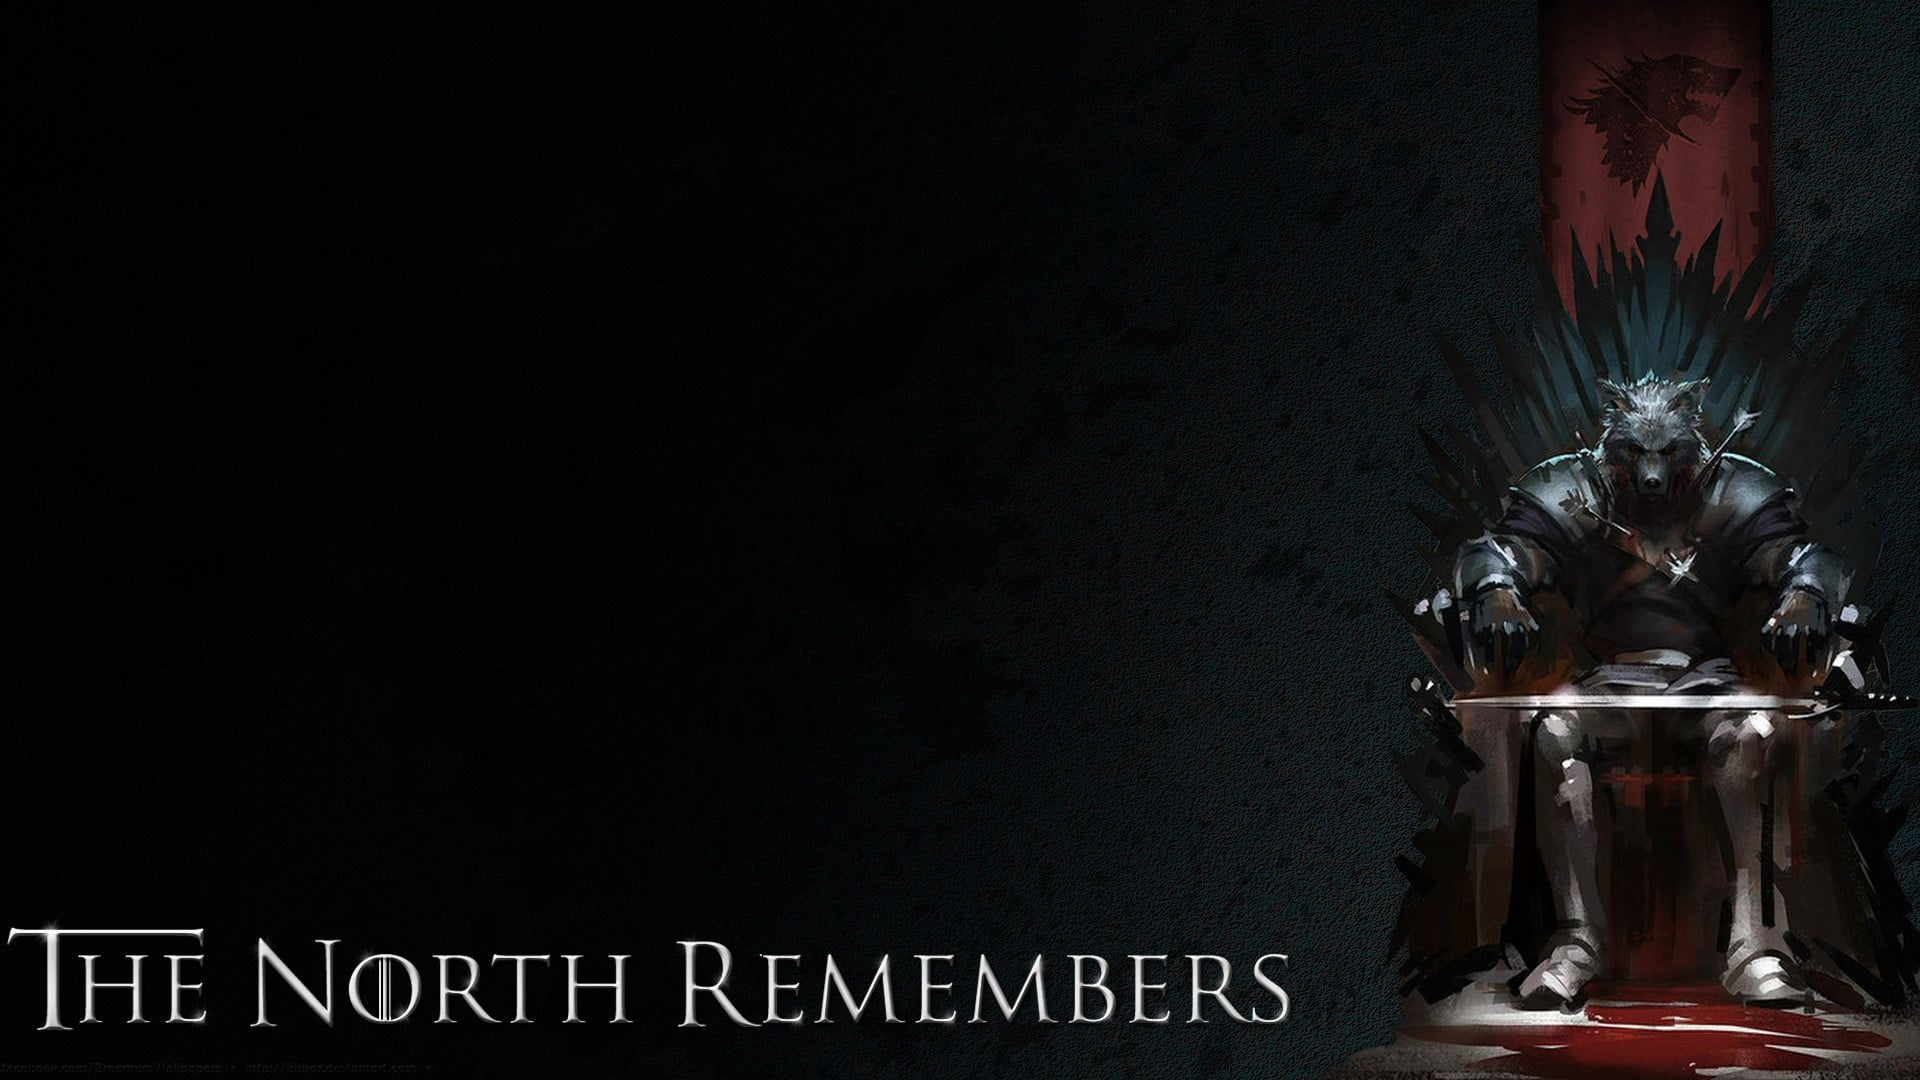 1920x1080 The North Remembers game of thrones HD wallpaper